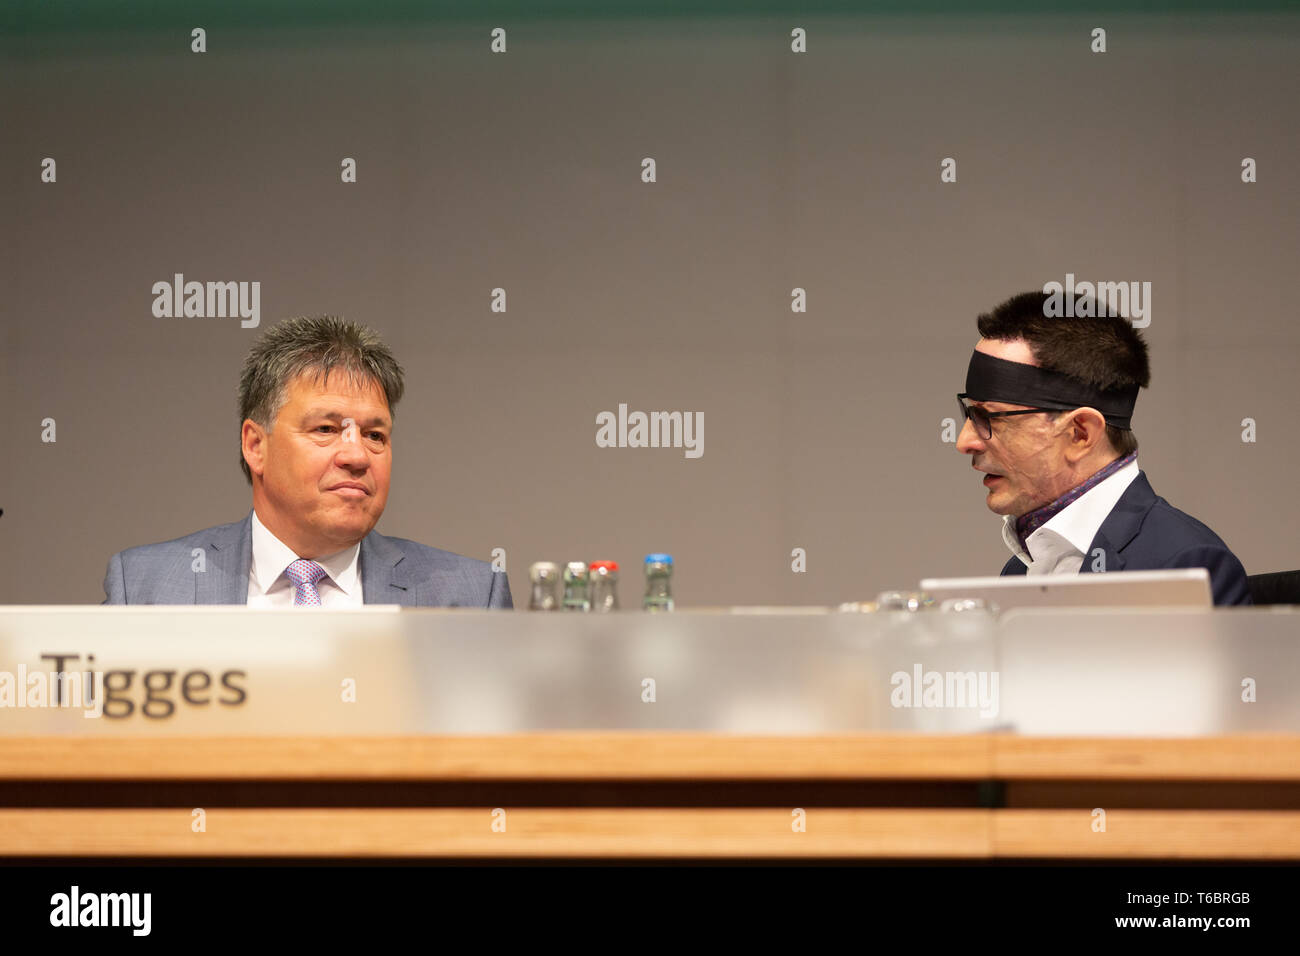 Essen, Germany, 30.04.2019, Innogy Annual General Meeting: CEO Uwe Tigges (L) and CFO Bernhard Guenther. Stock Photo